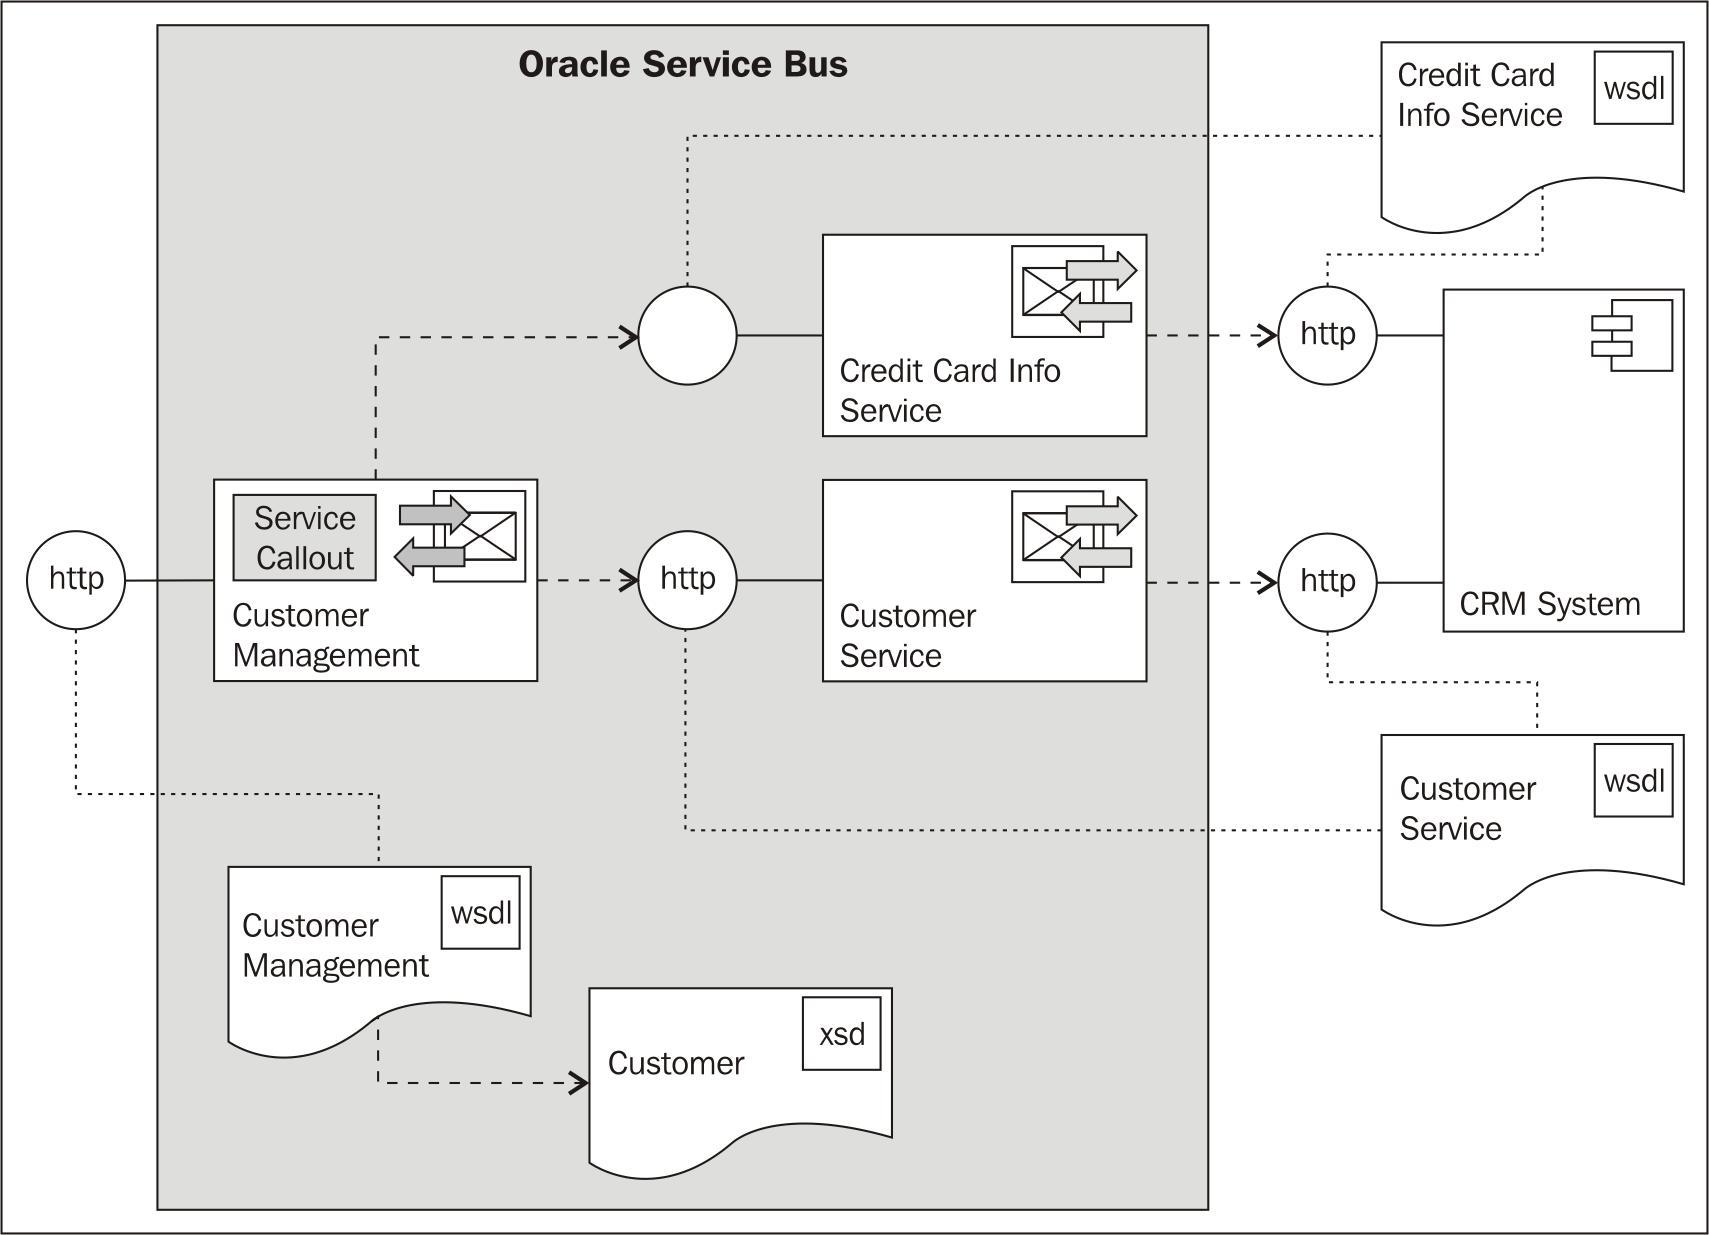 Using Service Callout action to invoke a service